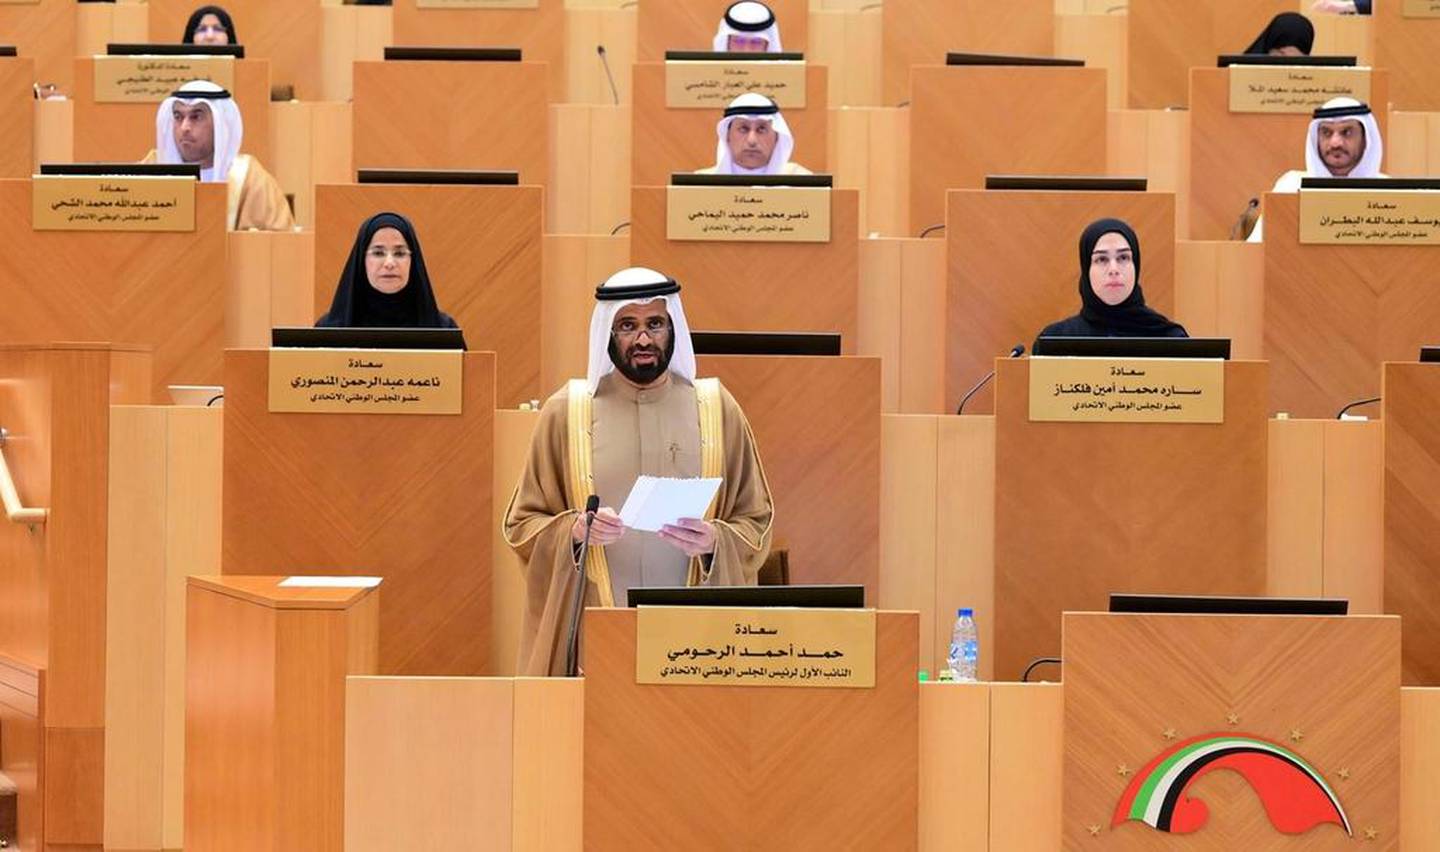 Hamad Al Rahoomi, FNC representative for Dubai, said many privately-owned maid firms had poor standards. Courtesy: Federal National Council